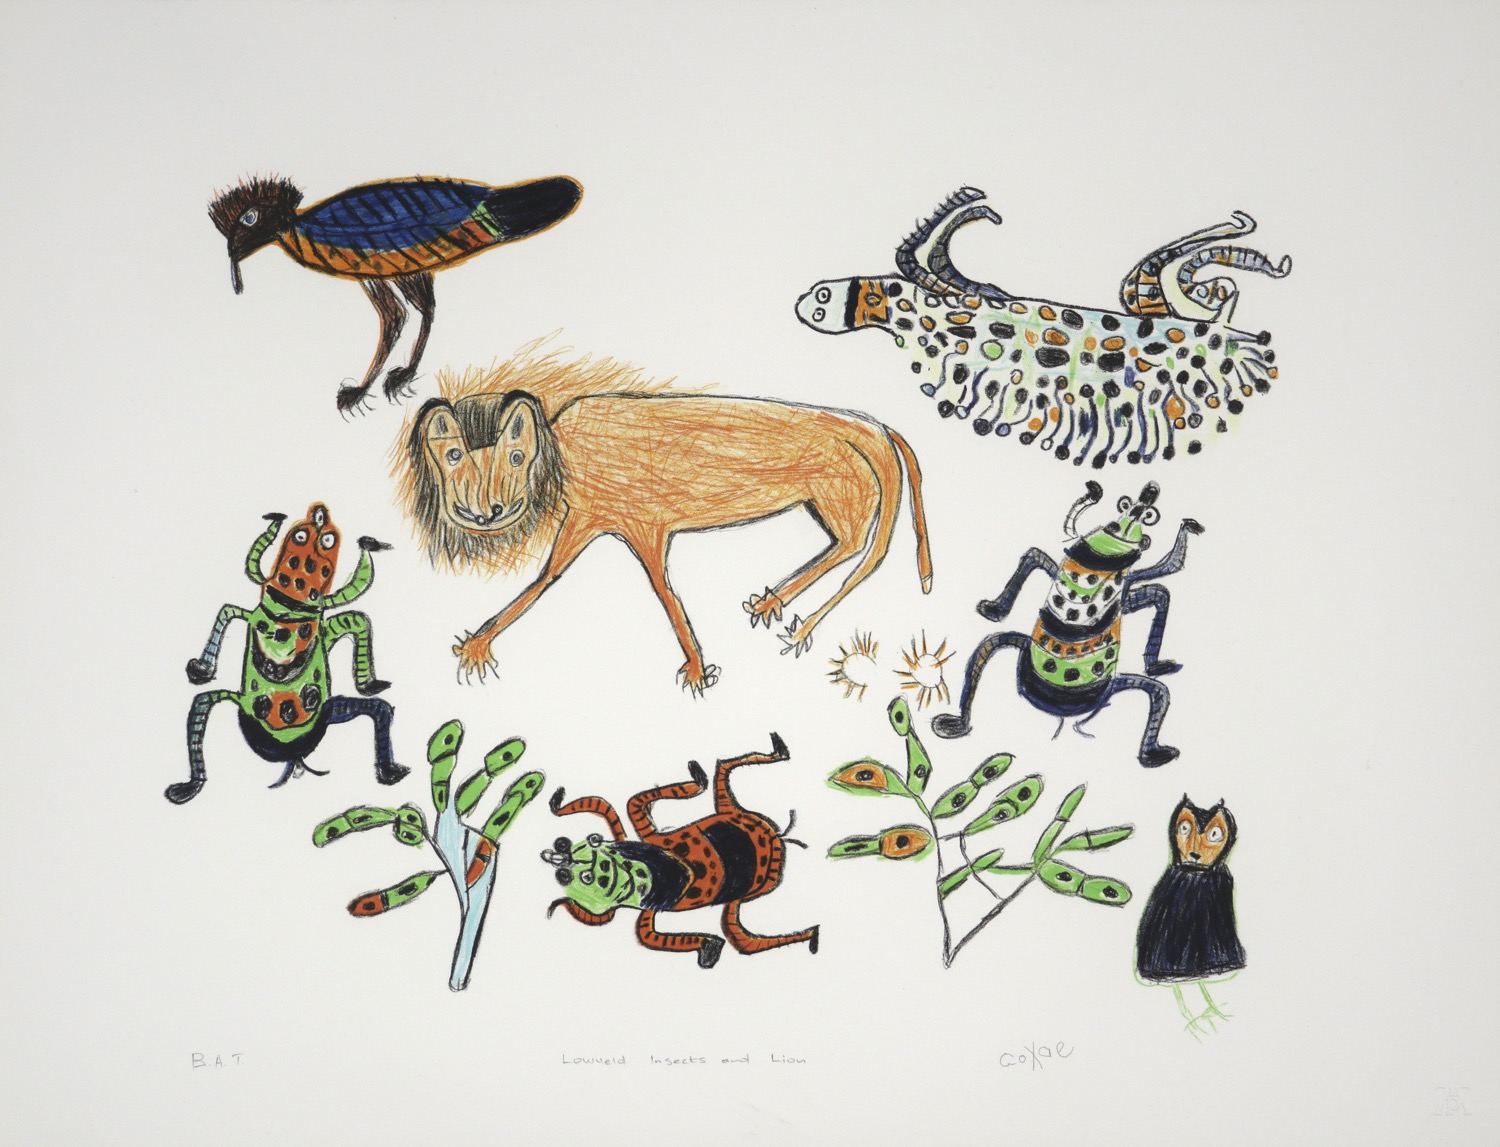 Colourful maginary insects, a lion, plants and birds set on a blank background